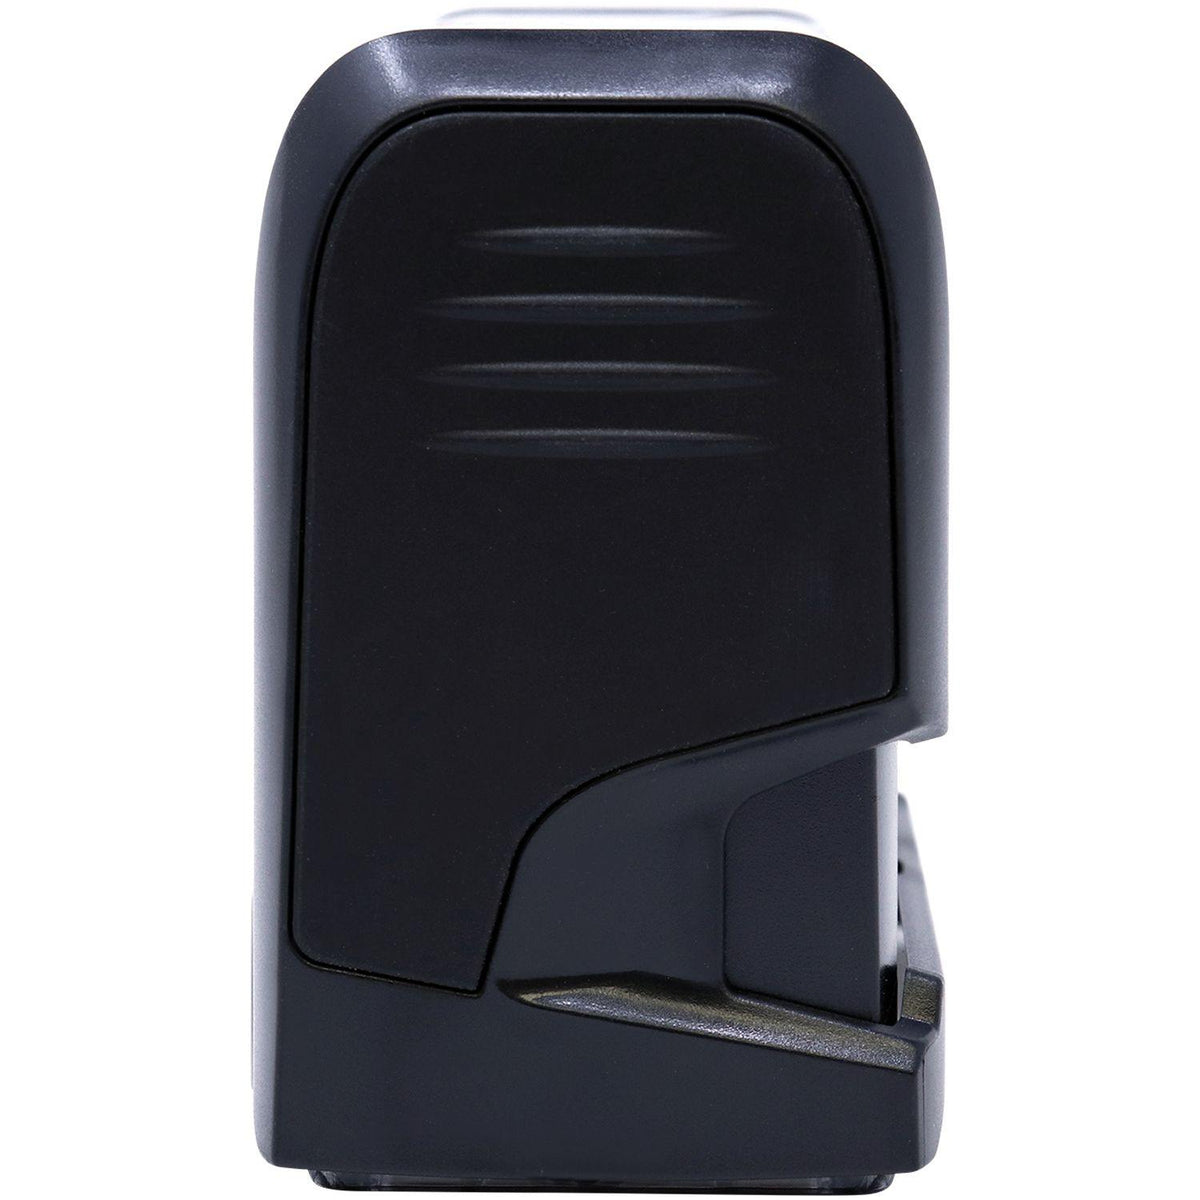 Self-Inking Confidential with Envelope Stamp - Engineer Seal Stamps - Brand_Trodat, Impression Size_Small, Stamp Type_Self-Inking Stamp, Type of Use_Accounting, Type of Use_Legal, Type of Use_Office, Type of Use_Postal &amp; Mailing